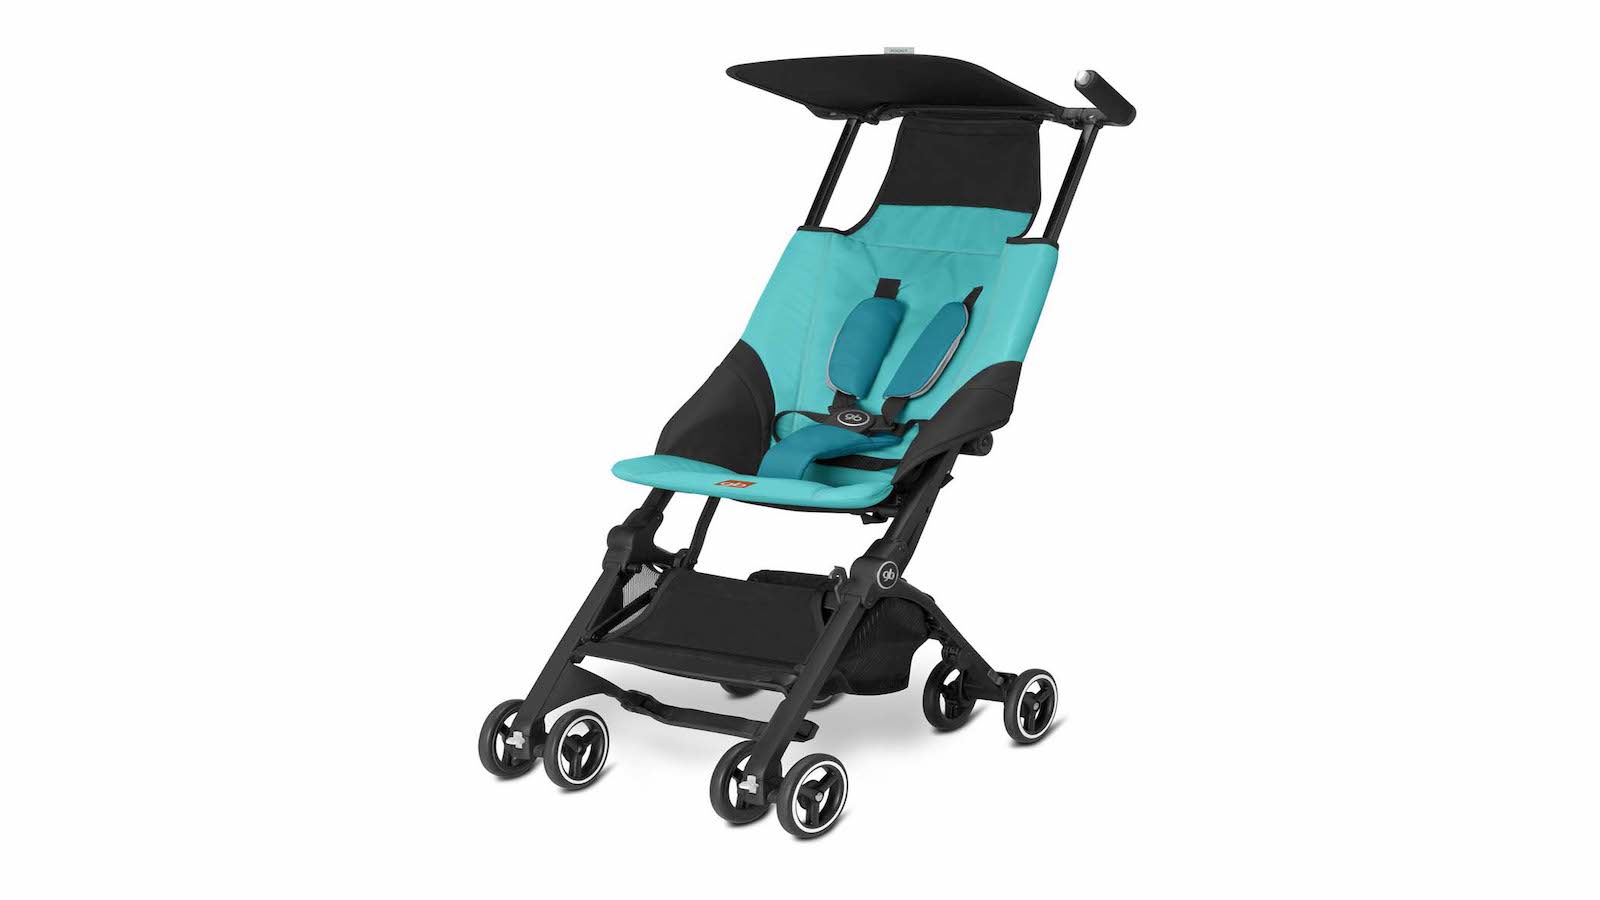 GB Pockit Stroller Review: Is Smallest Fold Always Best?